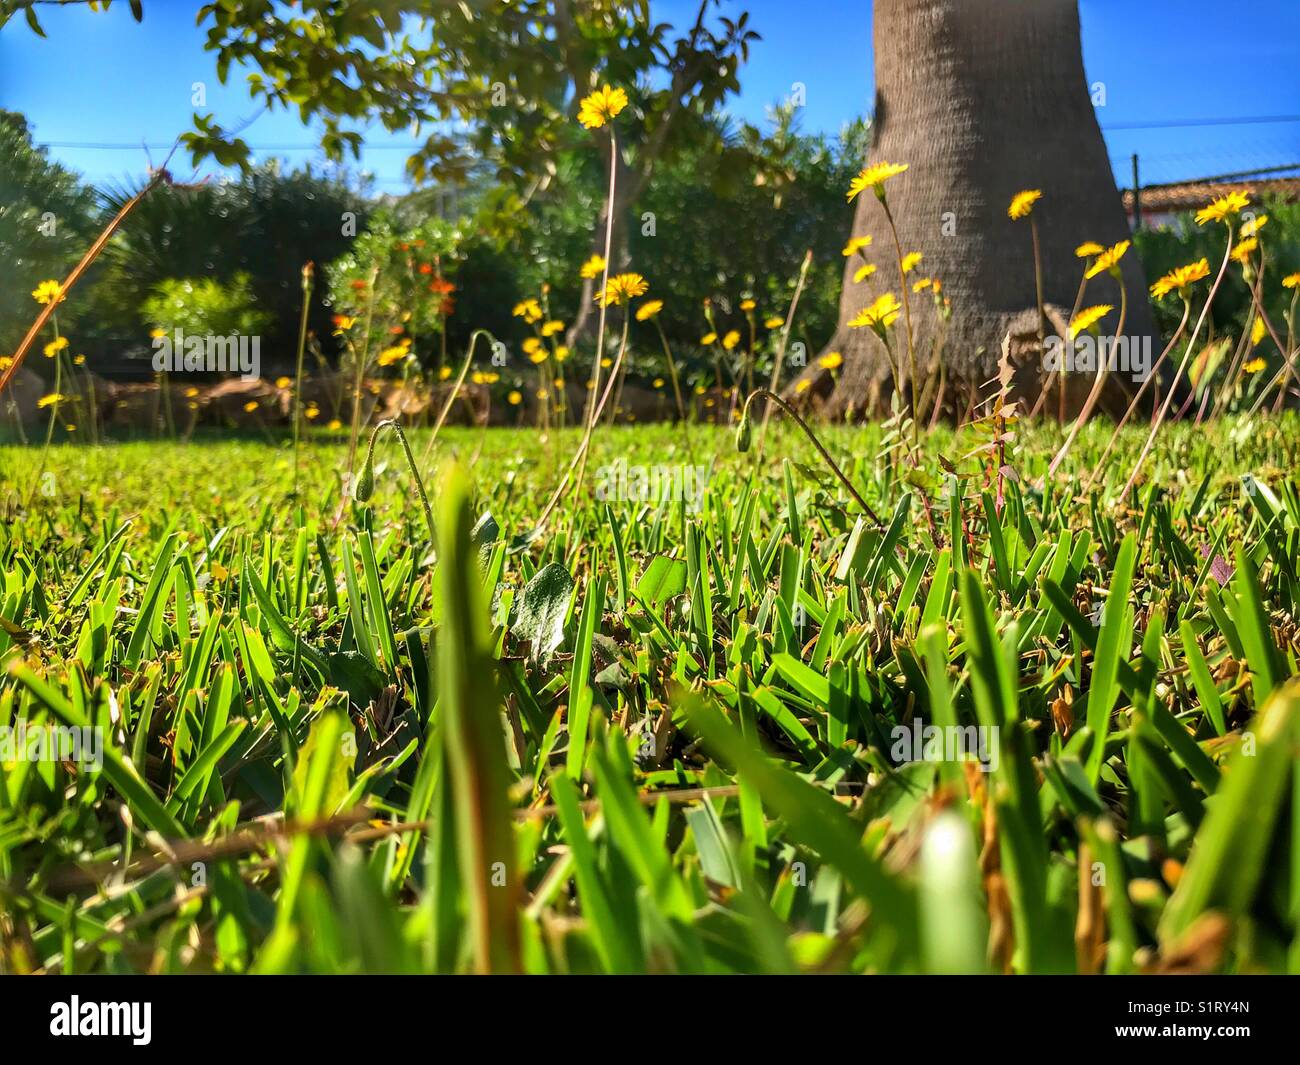 Low angle view across a lawn full of dandelion weeds in flower Stock Photo